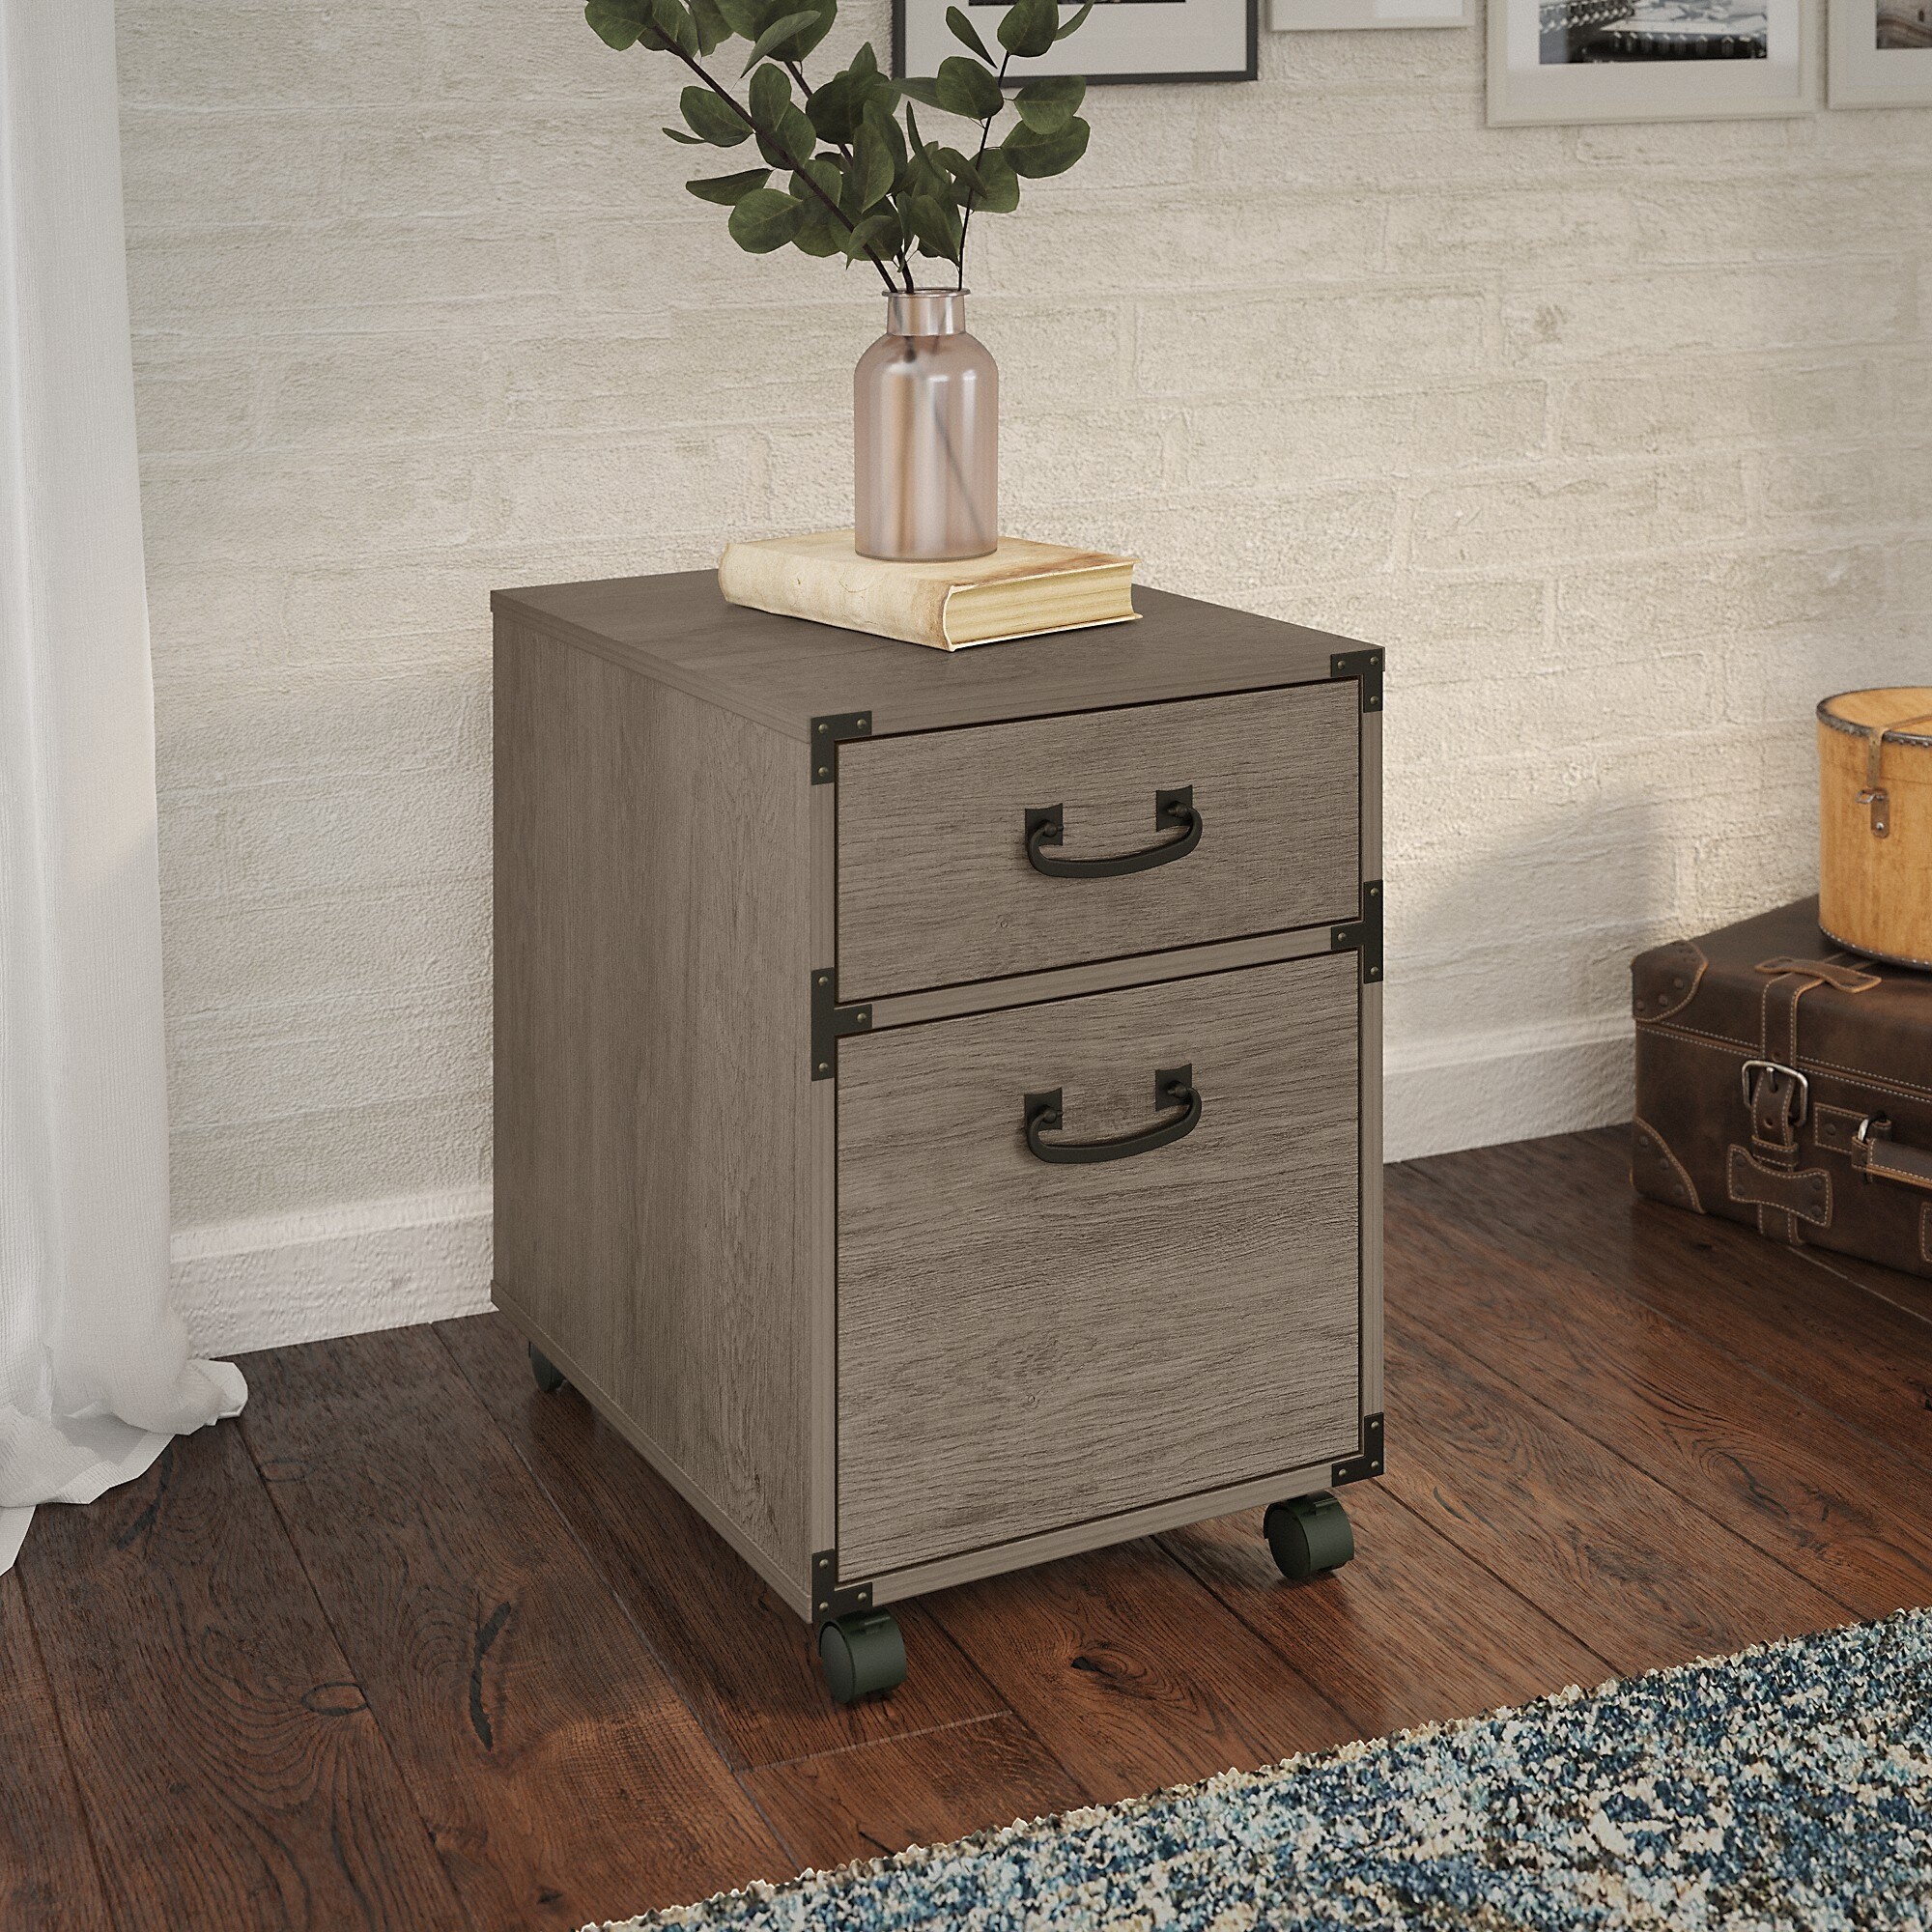 Details about   Ironworks File Cabinet From Kathy Ireland Home By Bush Furniture 